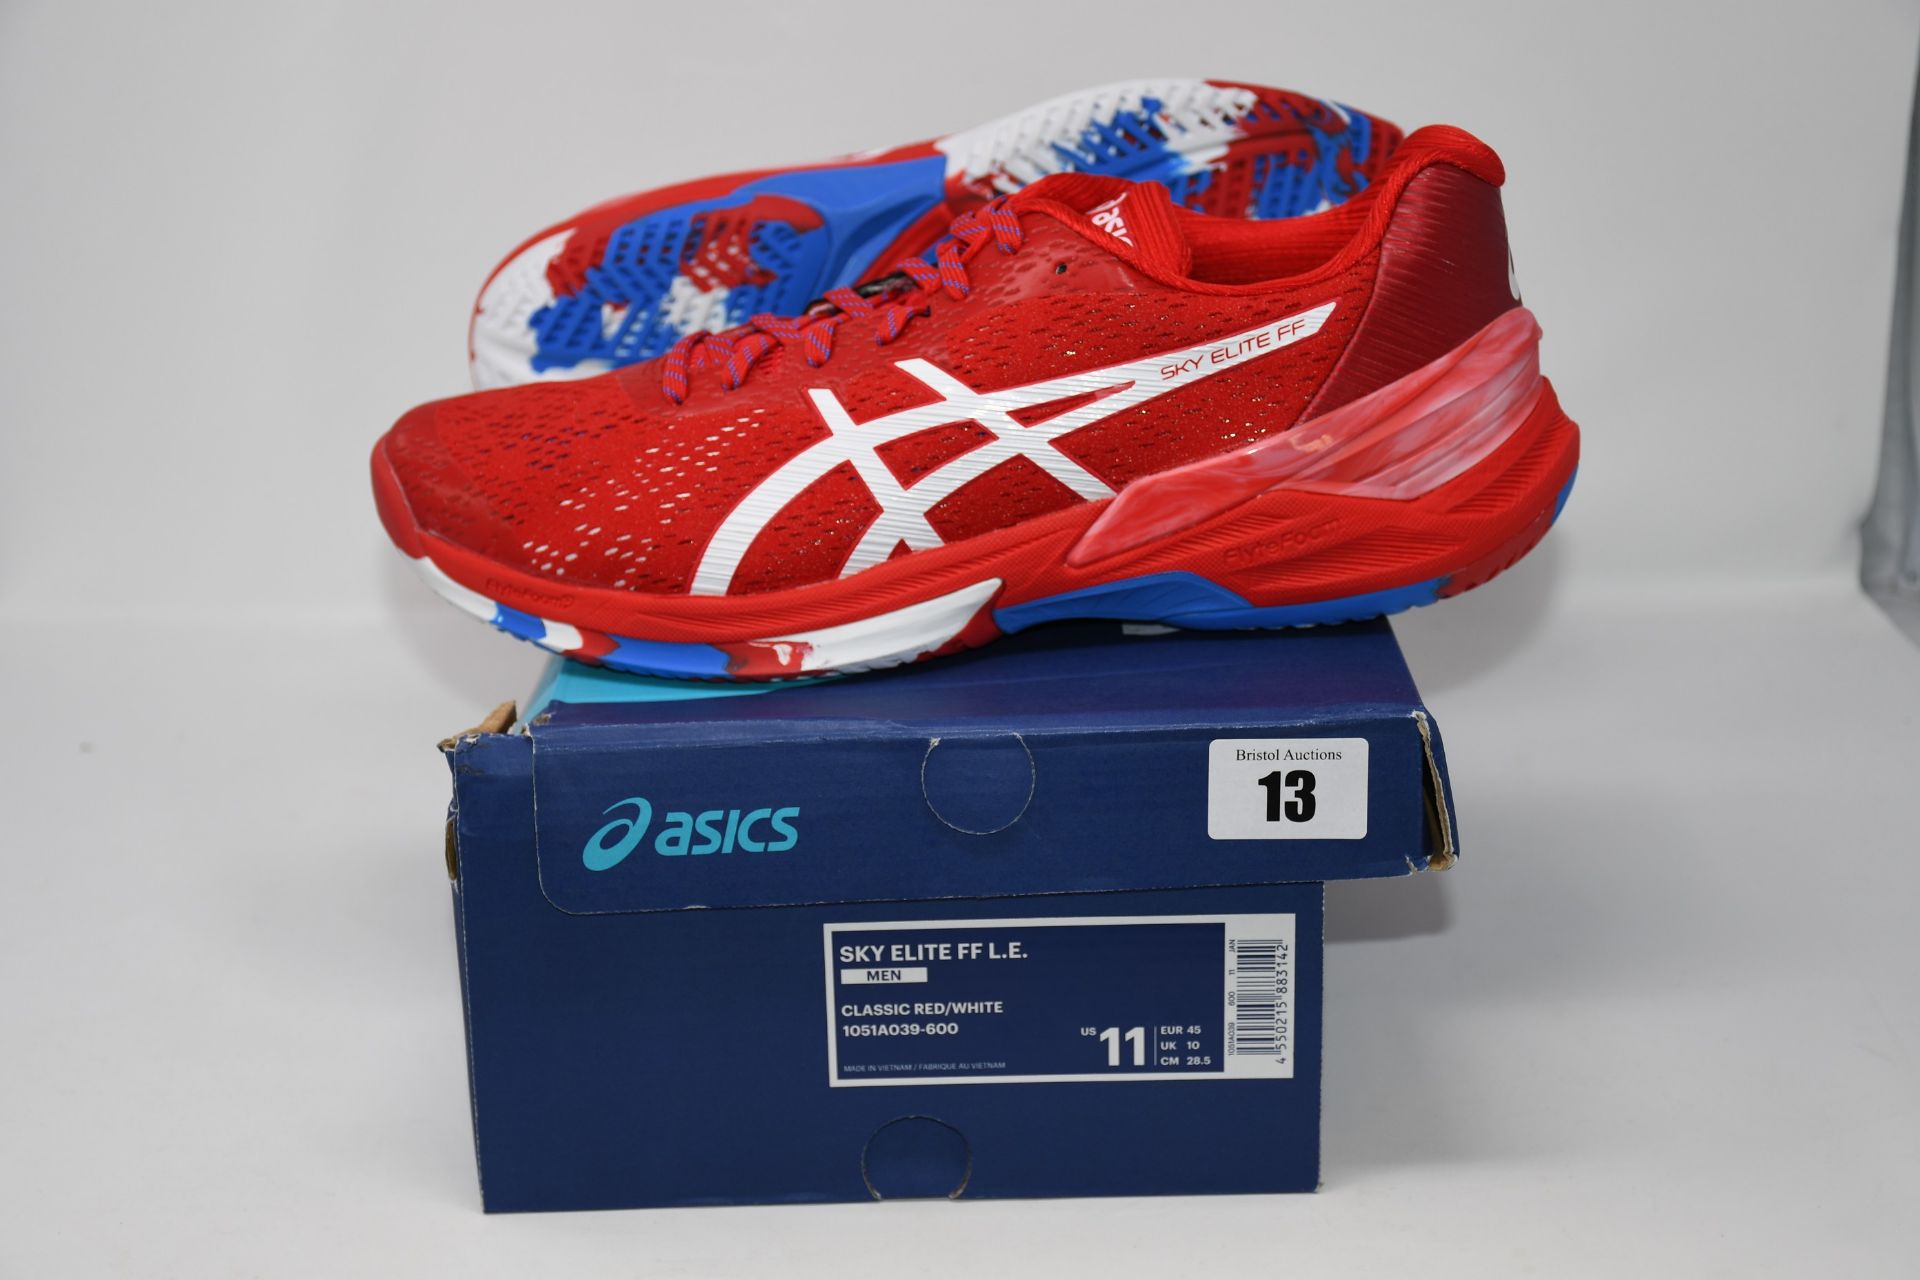 One pair of man's boxed as new Asics Sky Elite FF L.E trainers in classic red and white (UK 10).